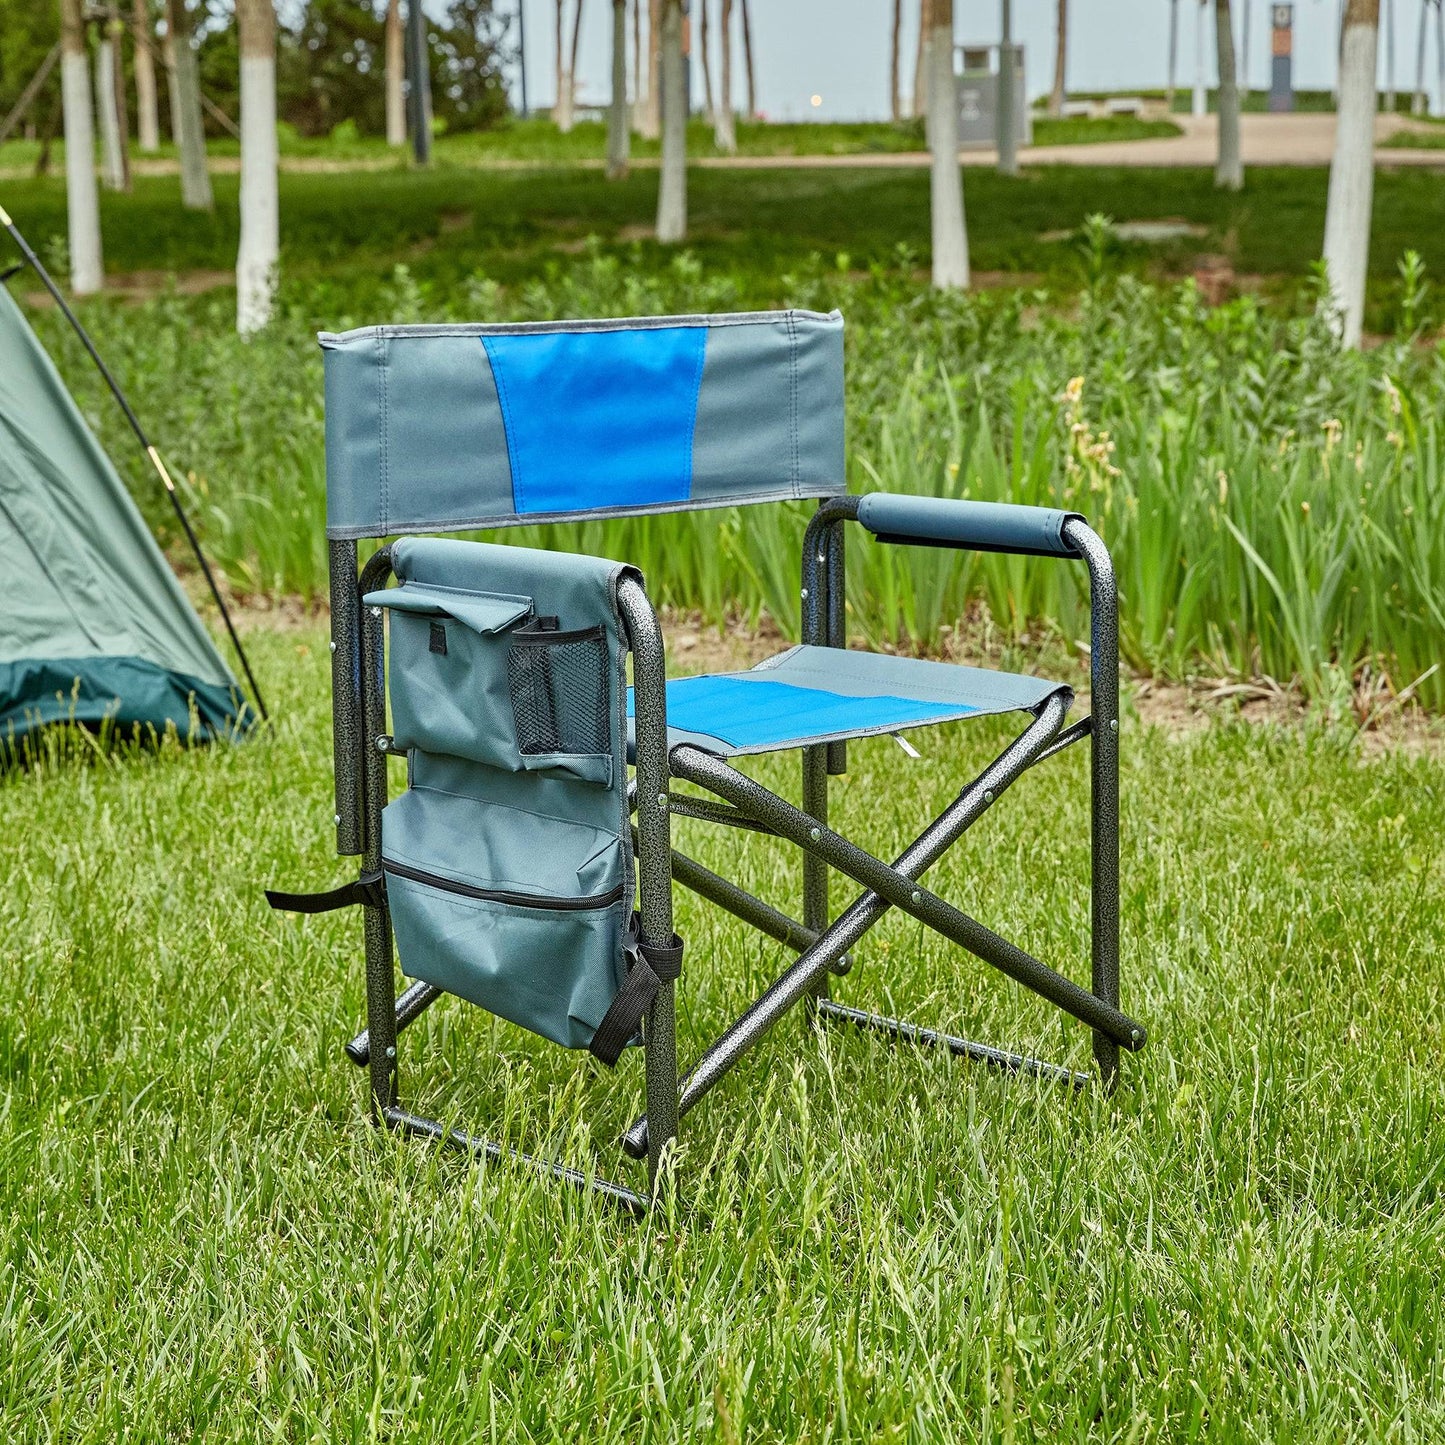 1-piece Padded Folding Outdoor Chair with Storage Pockets,Lightweight Oversized Directors Chair for indoor, Outdoor Camping, Picnics